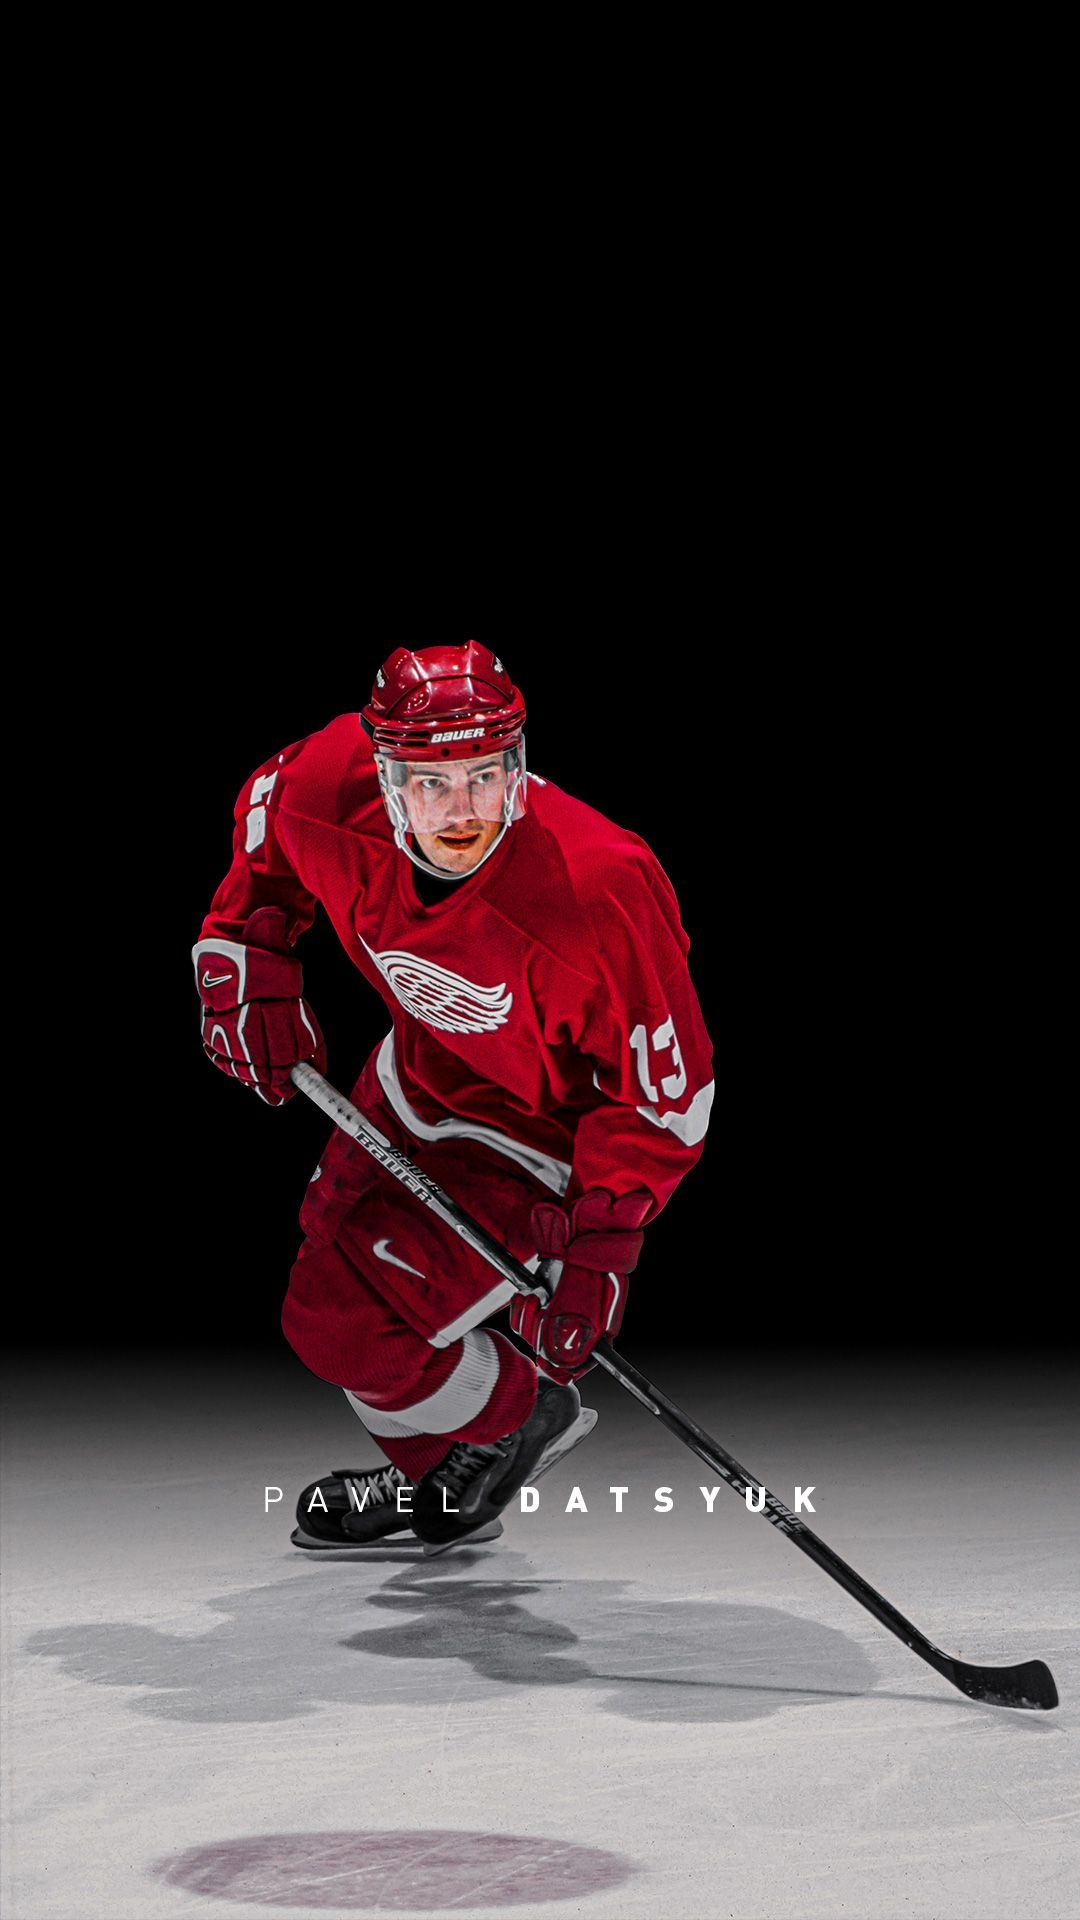 Detroit Red Wings: Pavel Datsyuk, Mike Ilitch has bought the team in 1982. 1080x1920 Full HD Background.